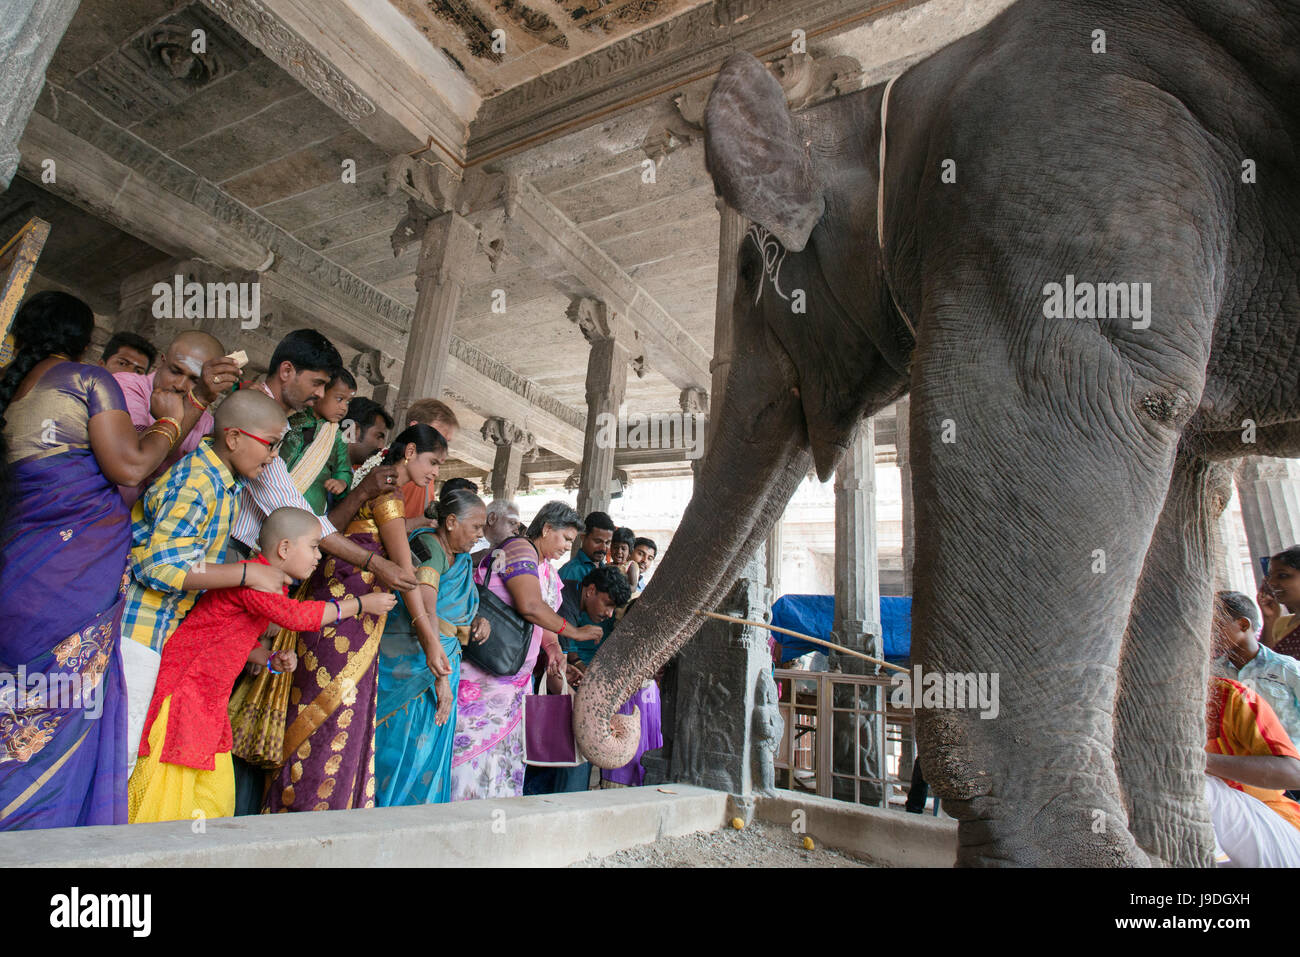 Hindu pilgrims have money at the ready to place in a temple elephant’s trunk at the Arunachaleshwara Temple in Tiruvannamalai, Tamil Nadu, India Stock Photo